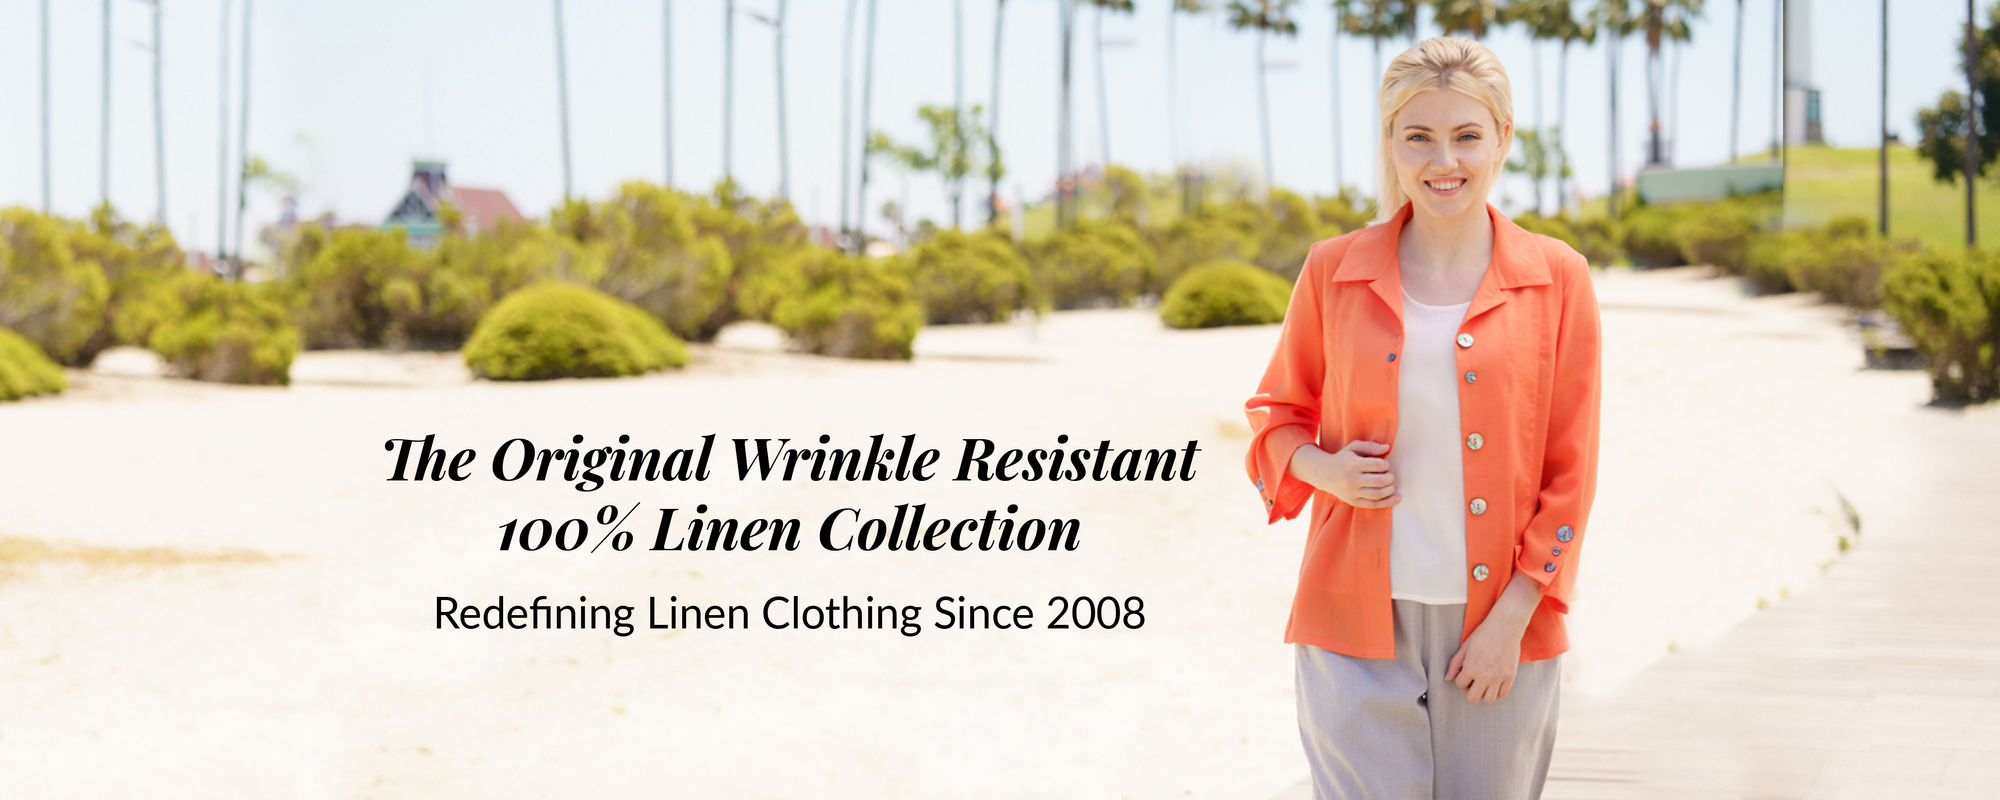 Product Care — Fridaze - The Original Wrinkle-Resistant Linen Collection